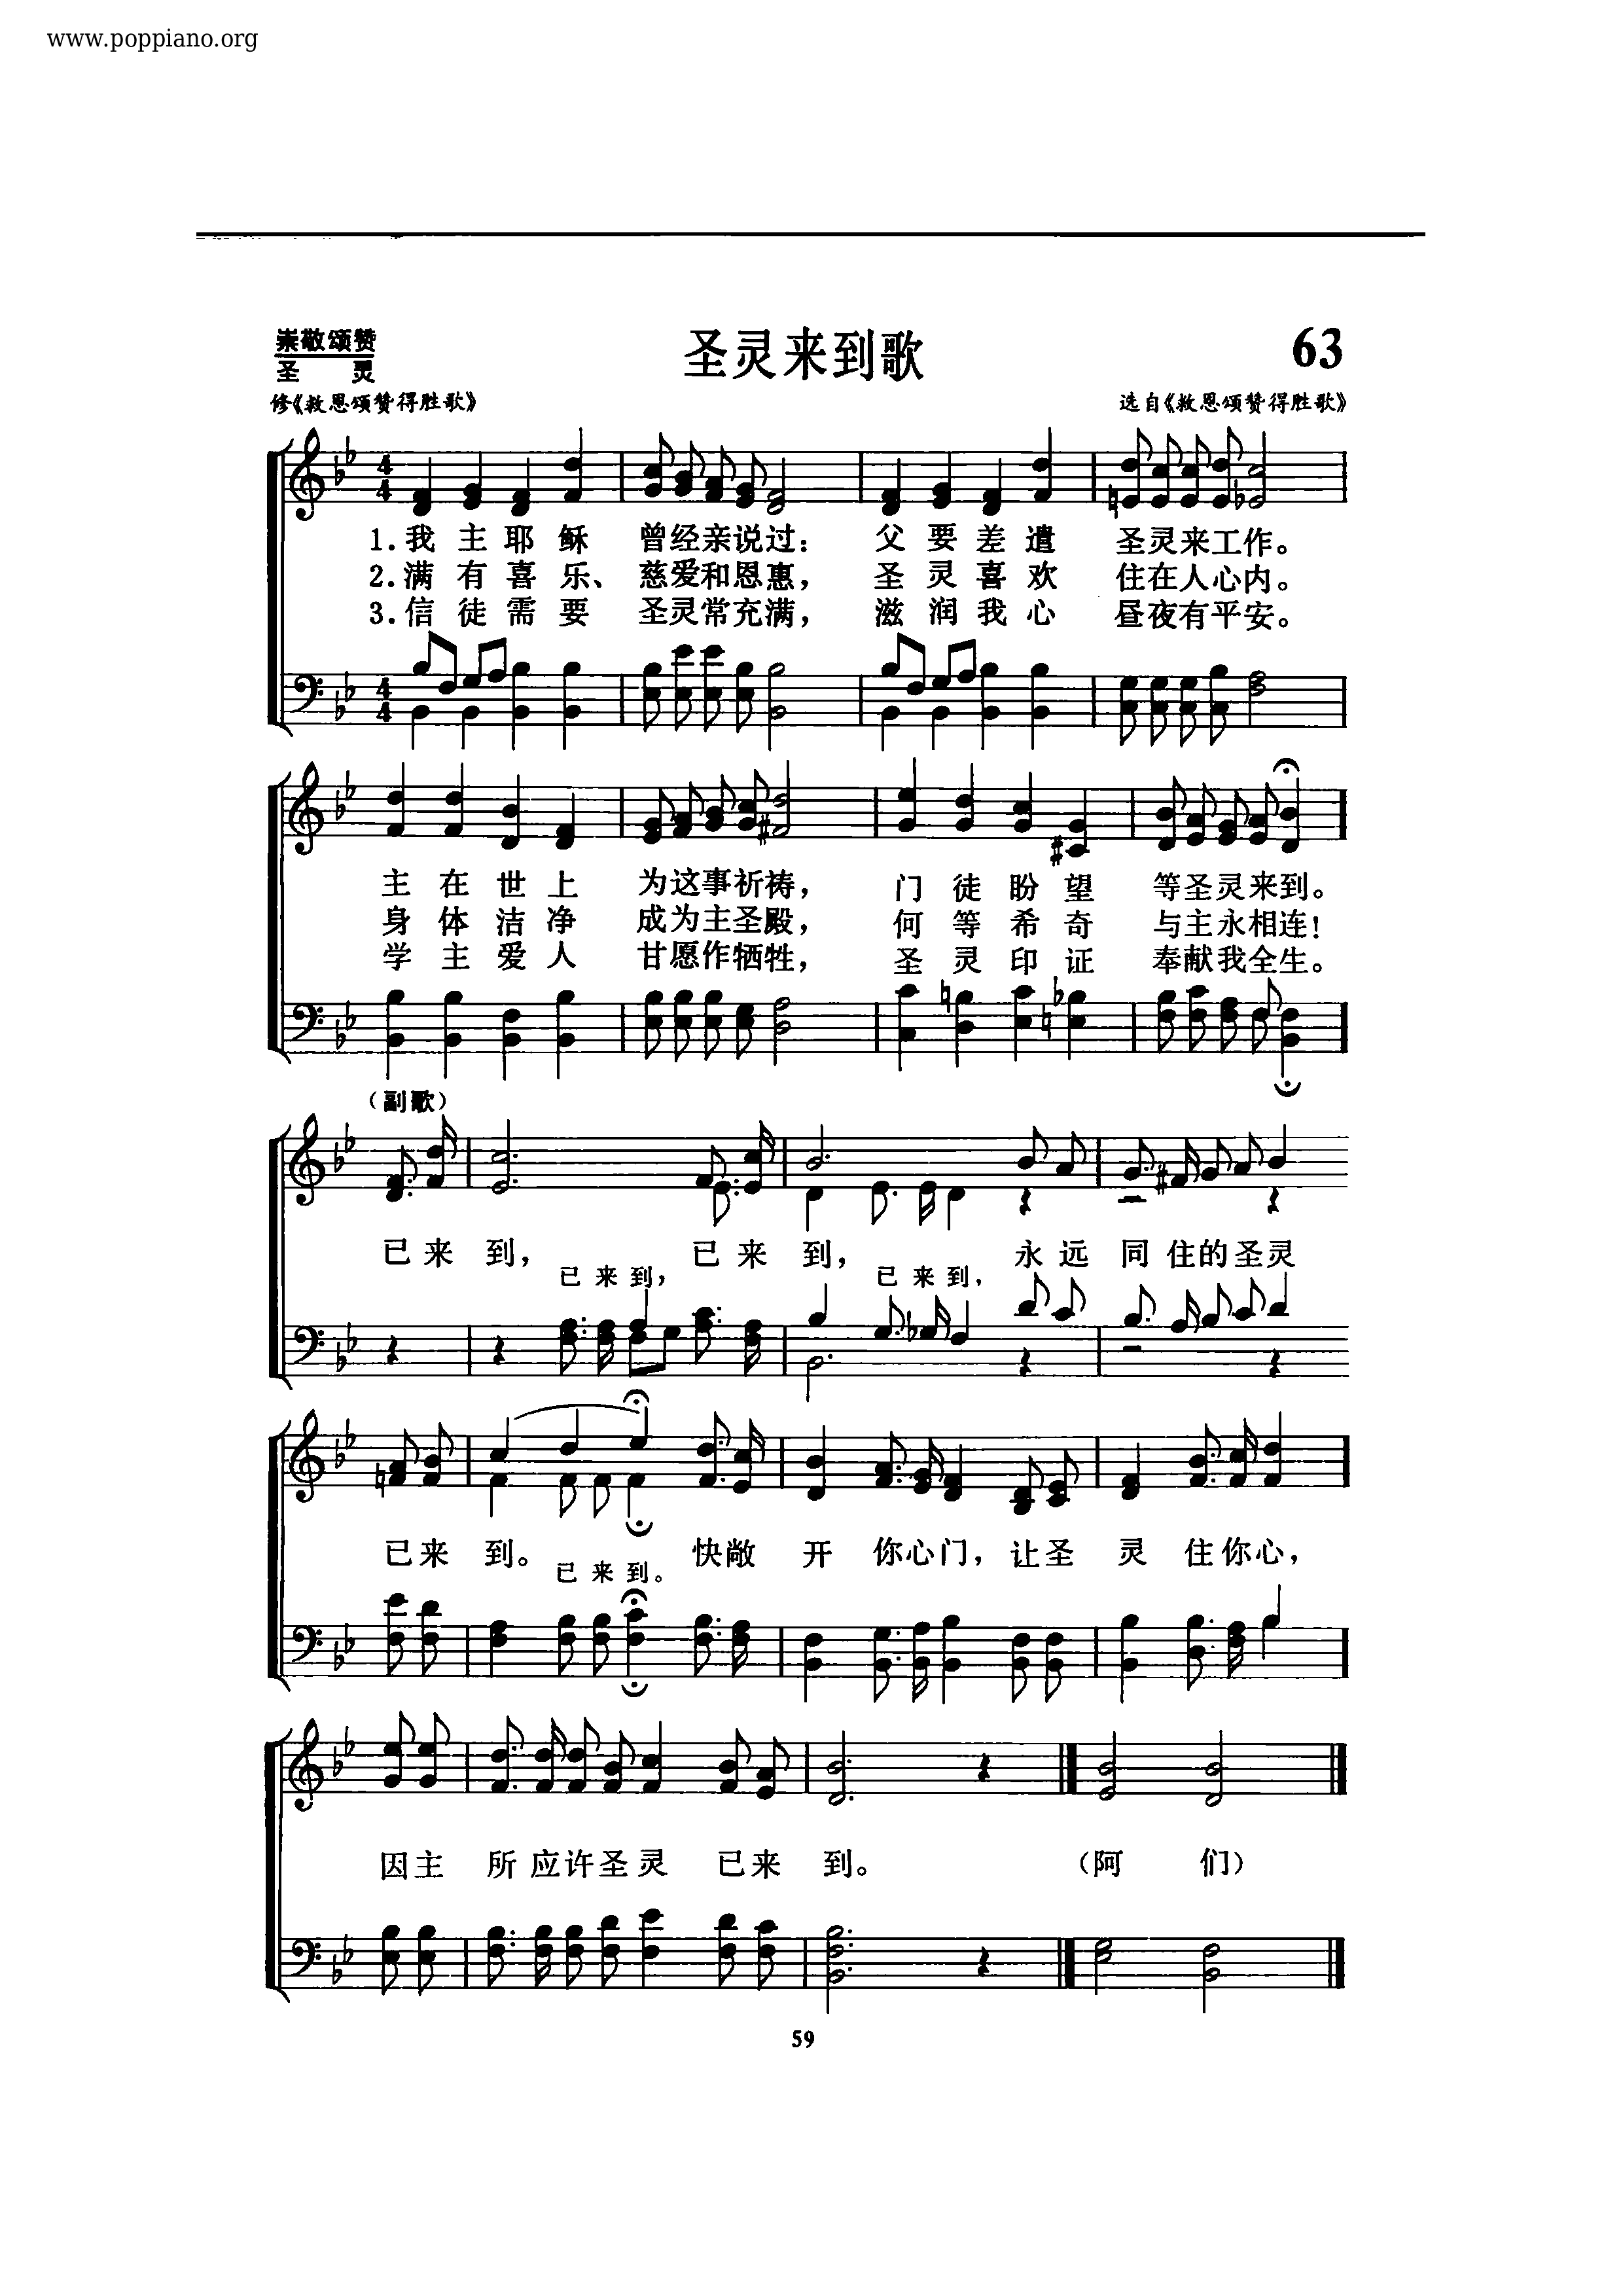 The Holy Spirit Comes To The Song Score